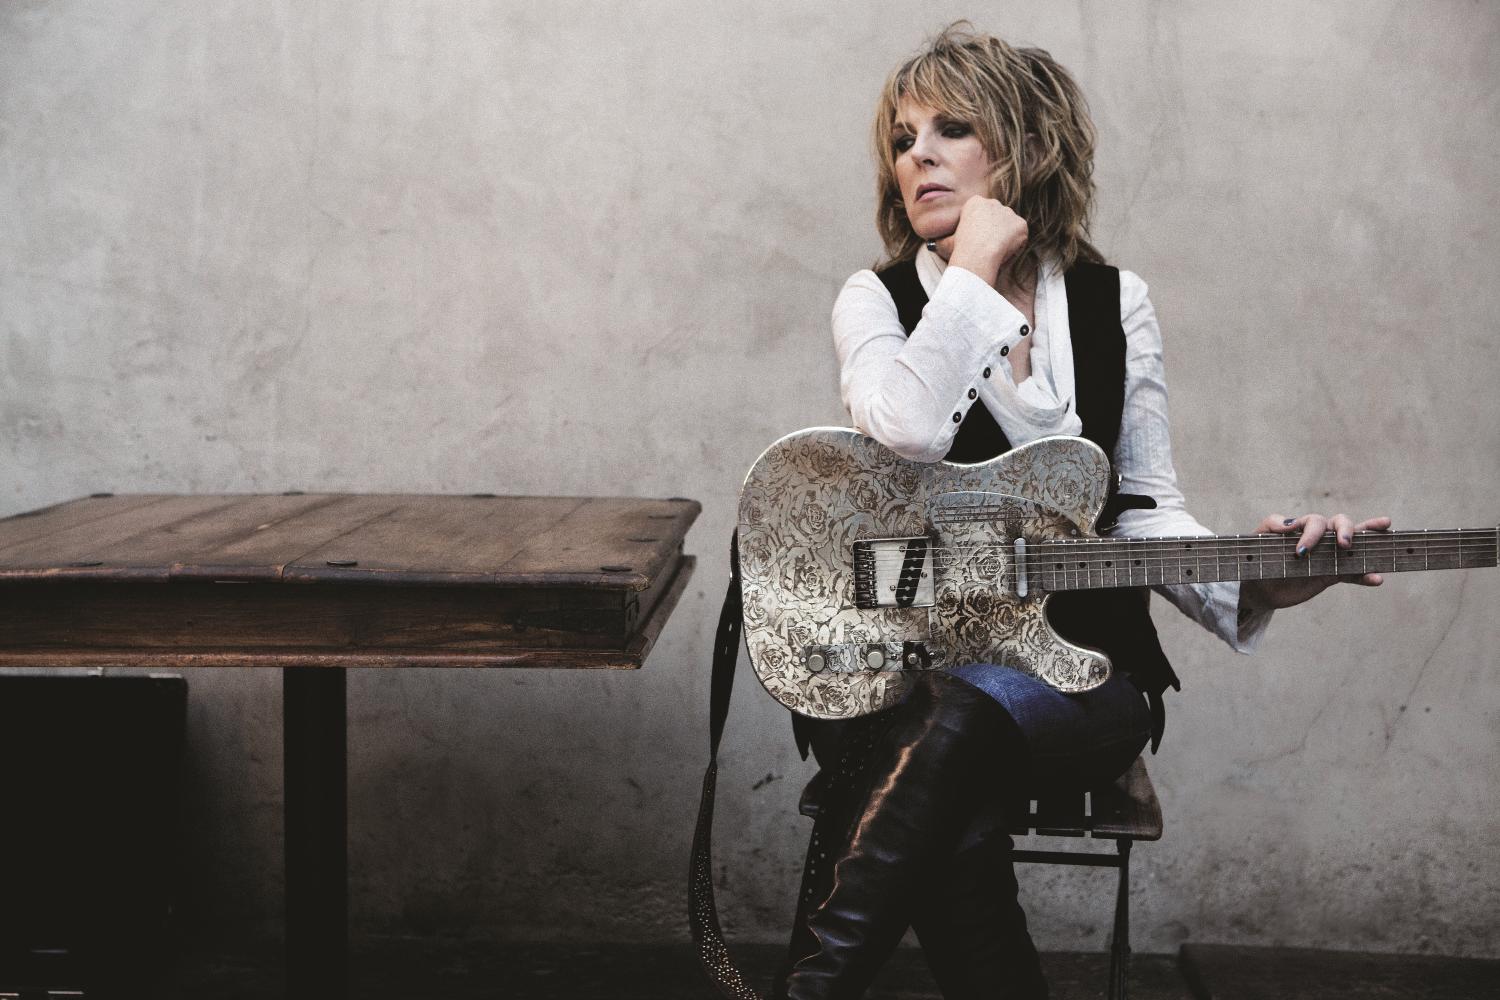 Lucinda Williams will perform at 2013 30A Songwriters Festival